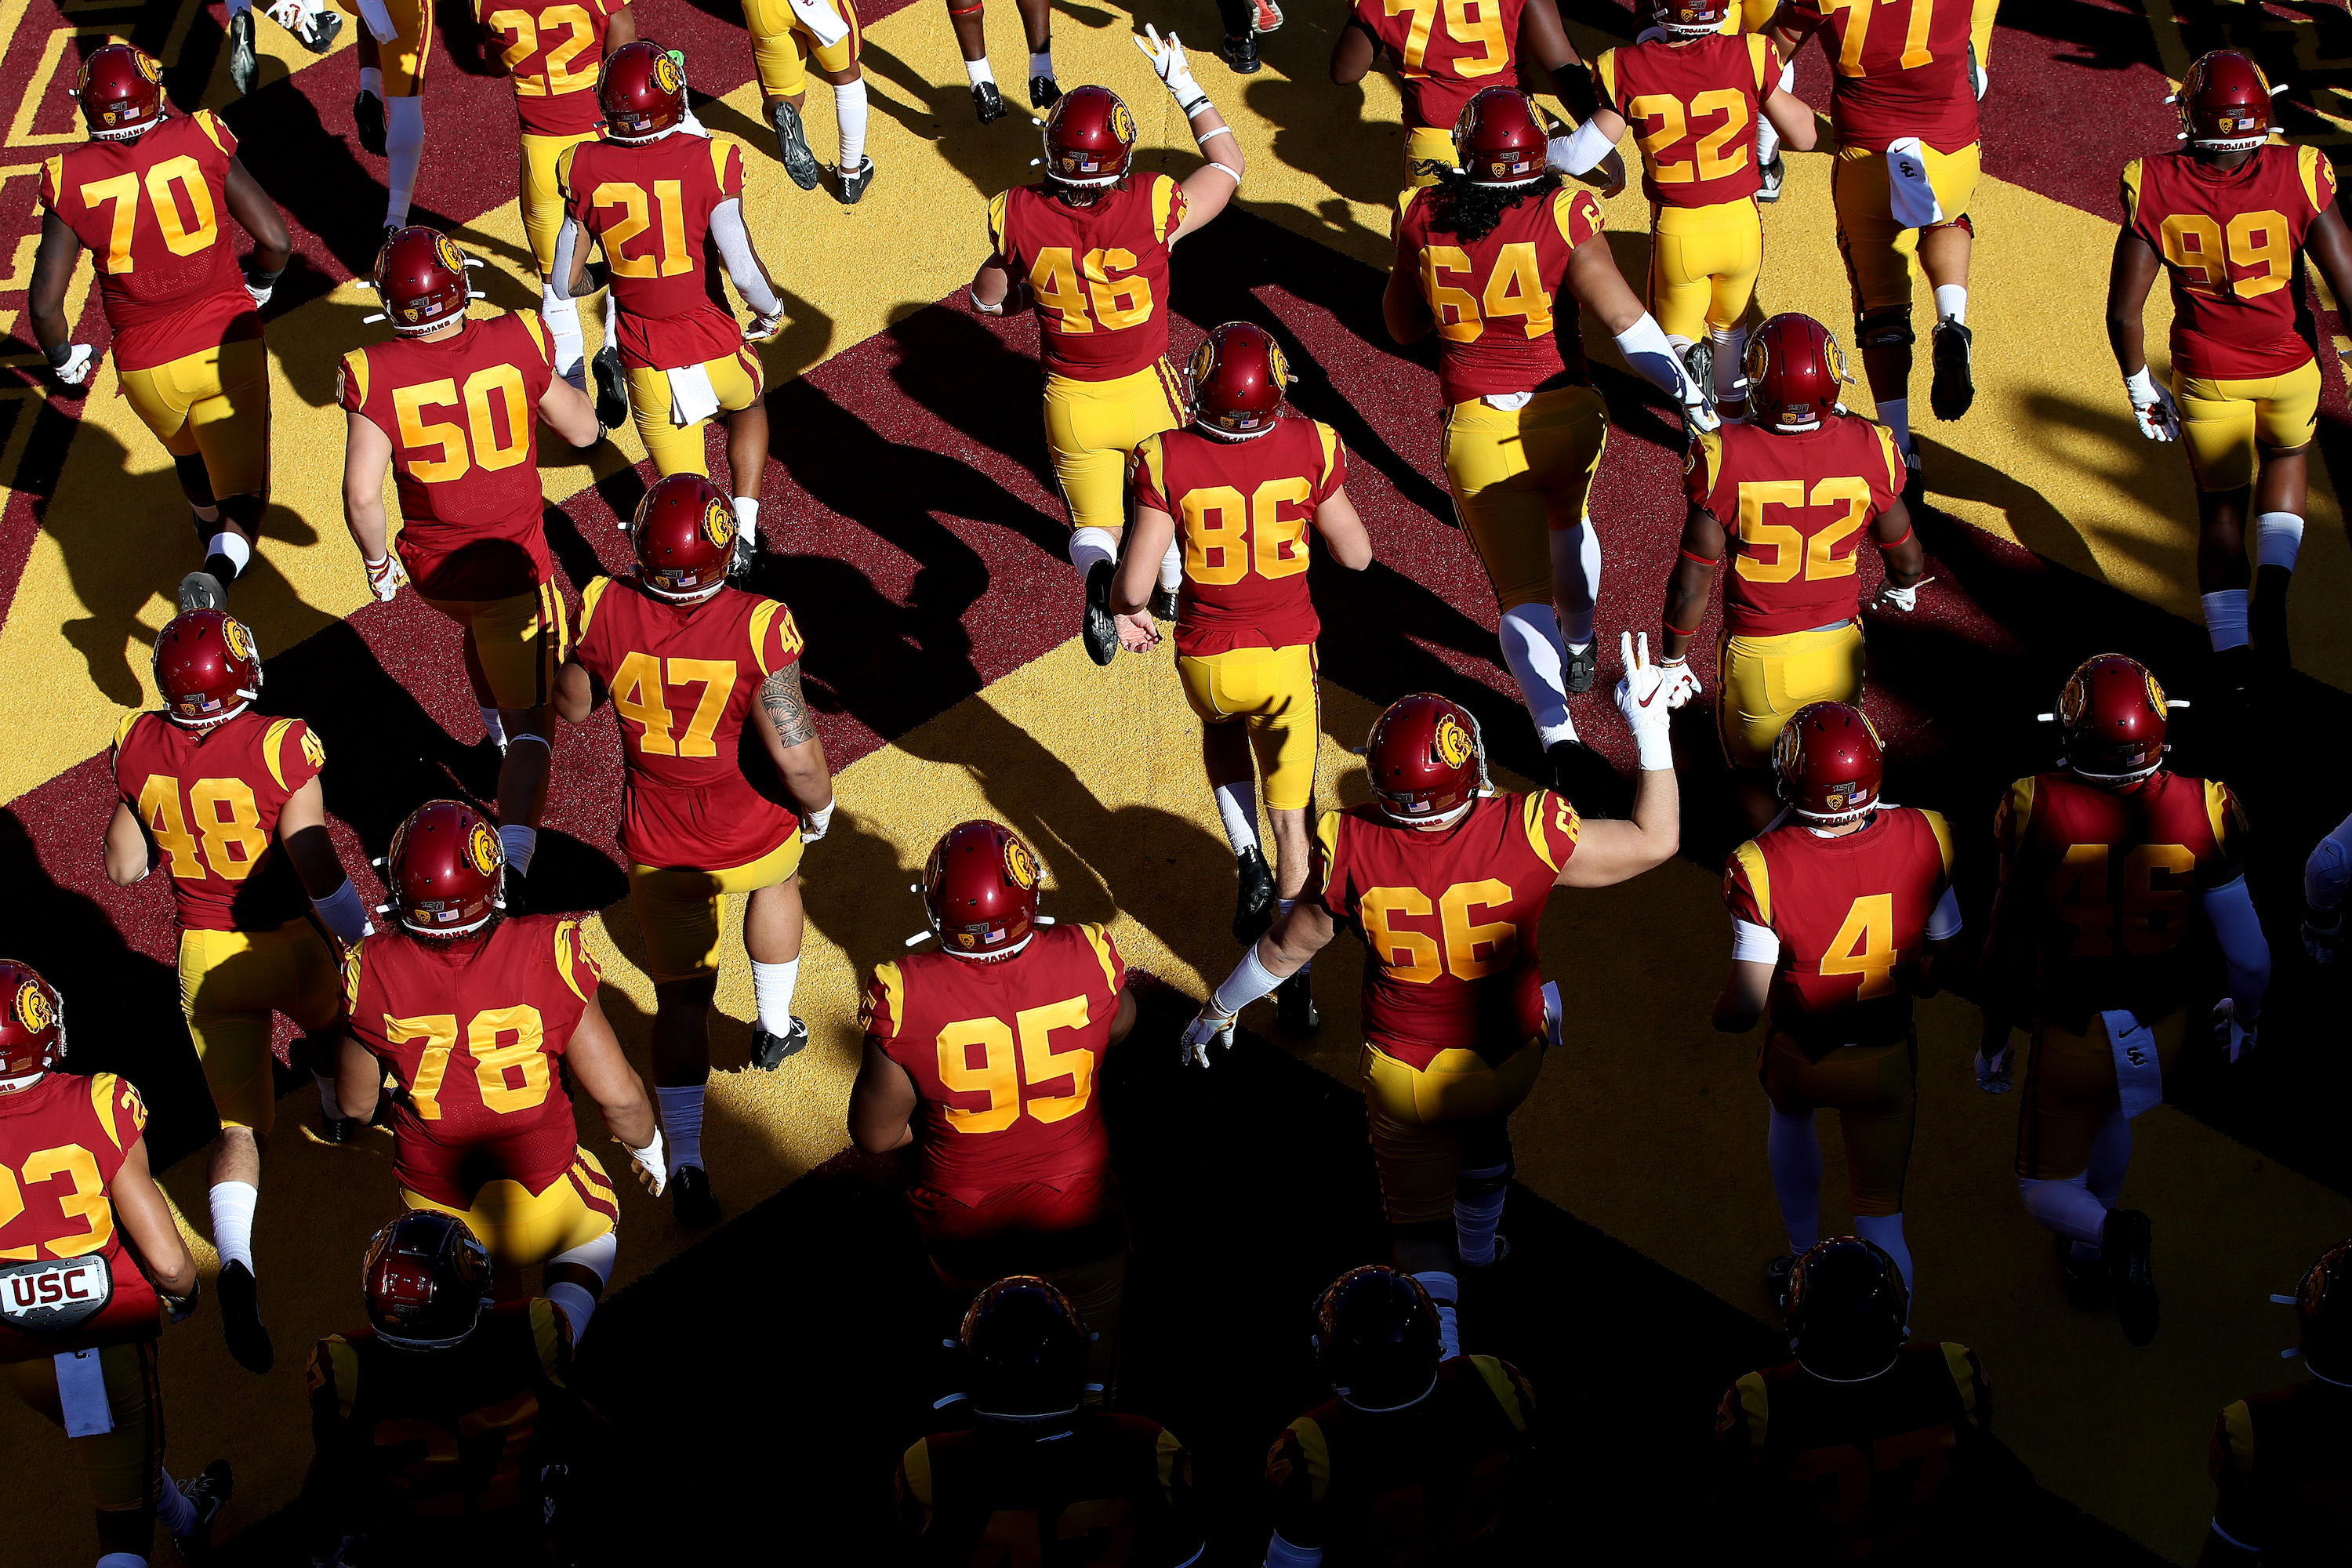 LOS ANGELES, CALIFORNIA - NOVEMBER 23: The USC Trojans run onto the field prior to a game against the UCLA Bruins at Los Angeles Memorial Coliseum on November 23, 2019 in Los Angeles, California. (Photo by Sean M. Haffey/Getty Images)